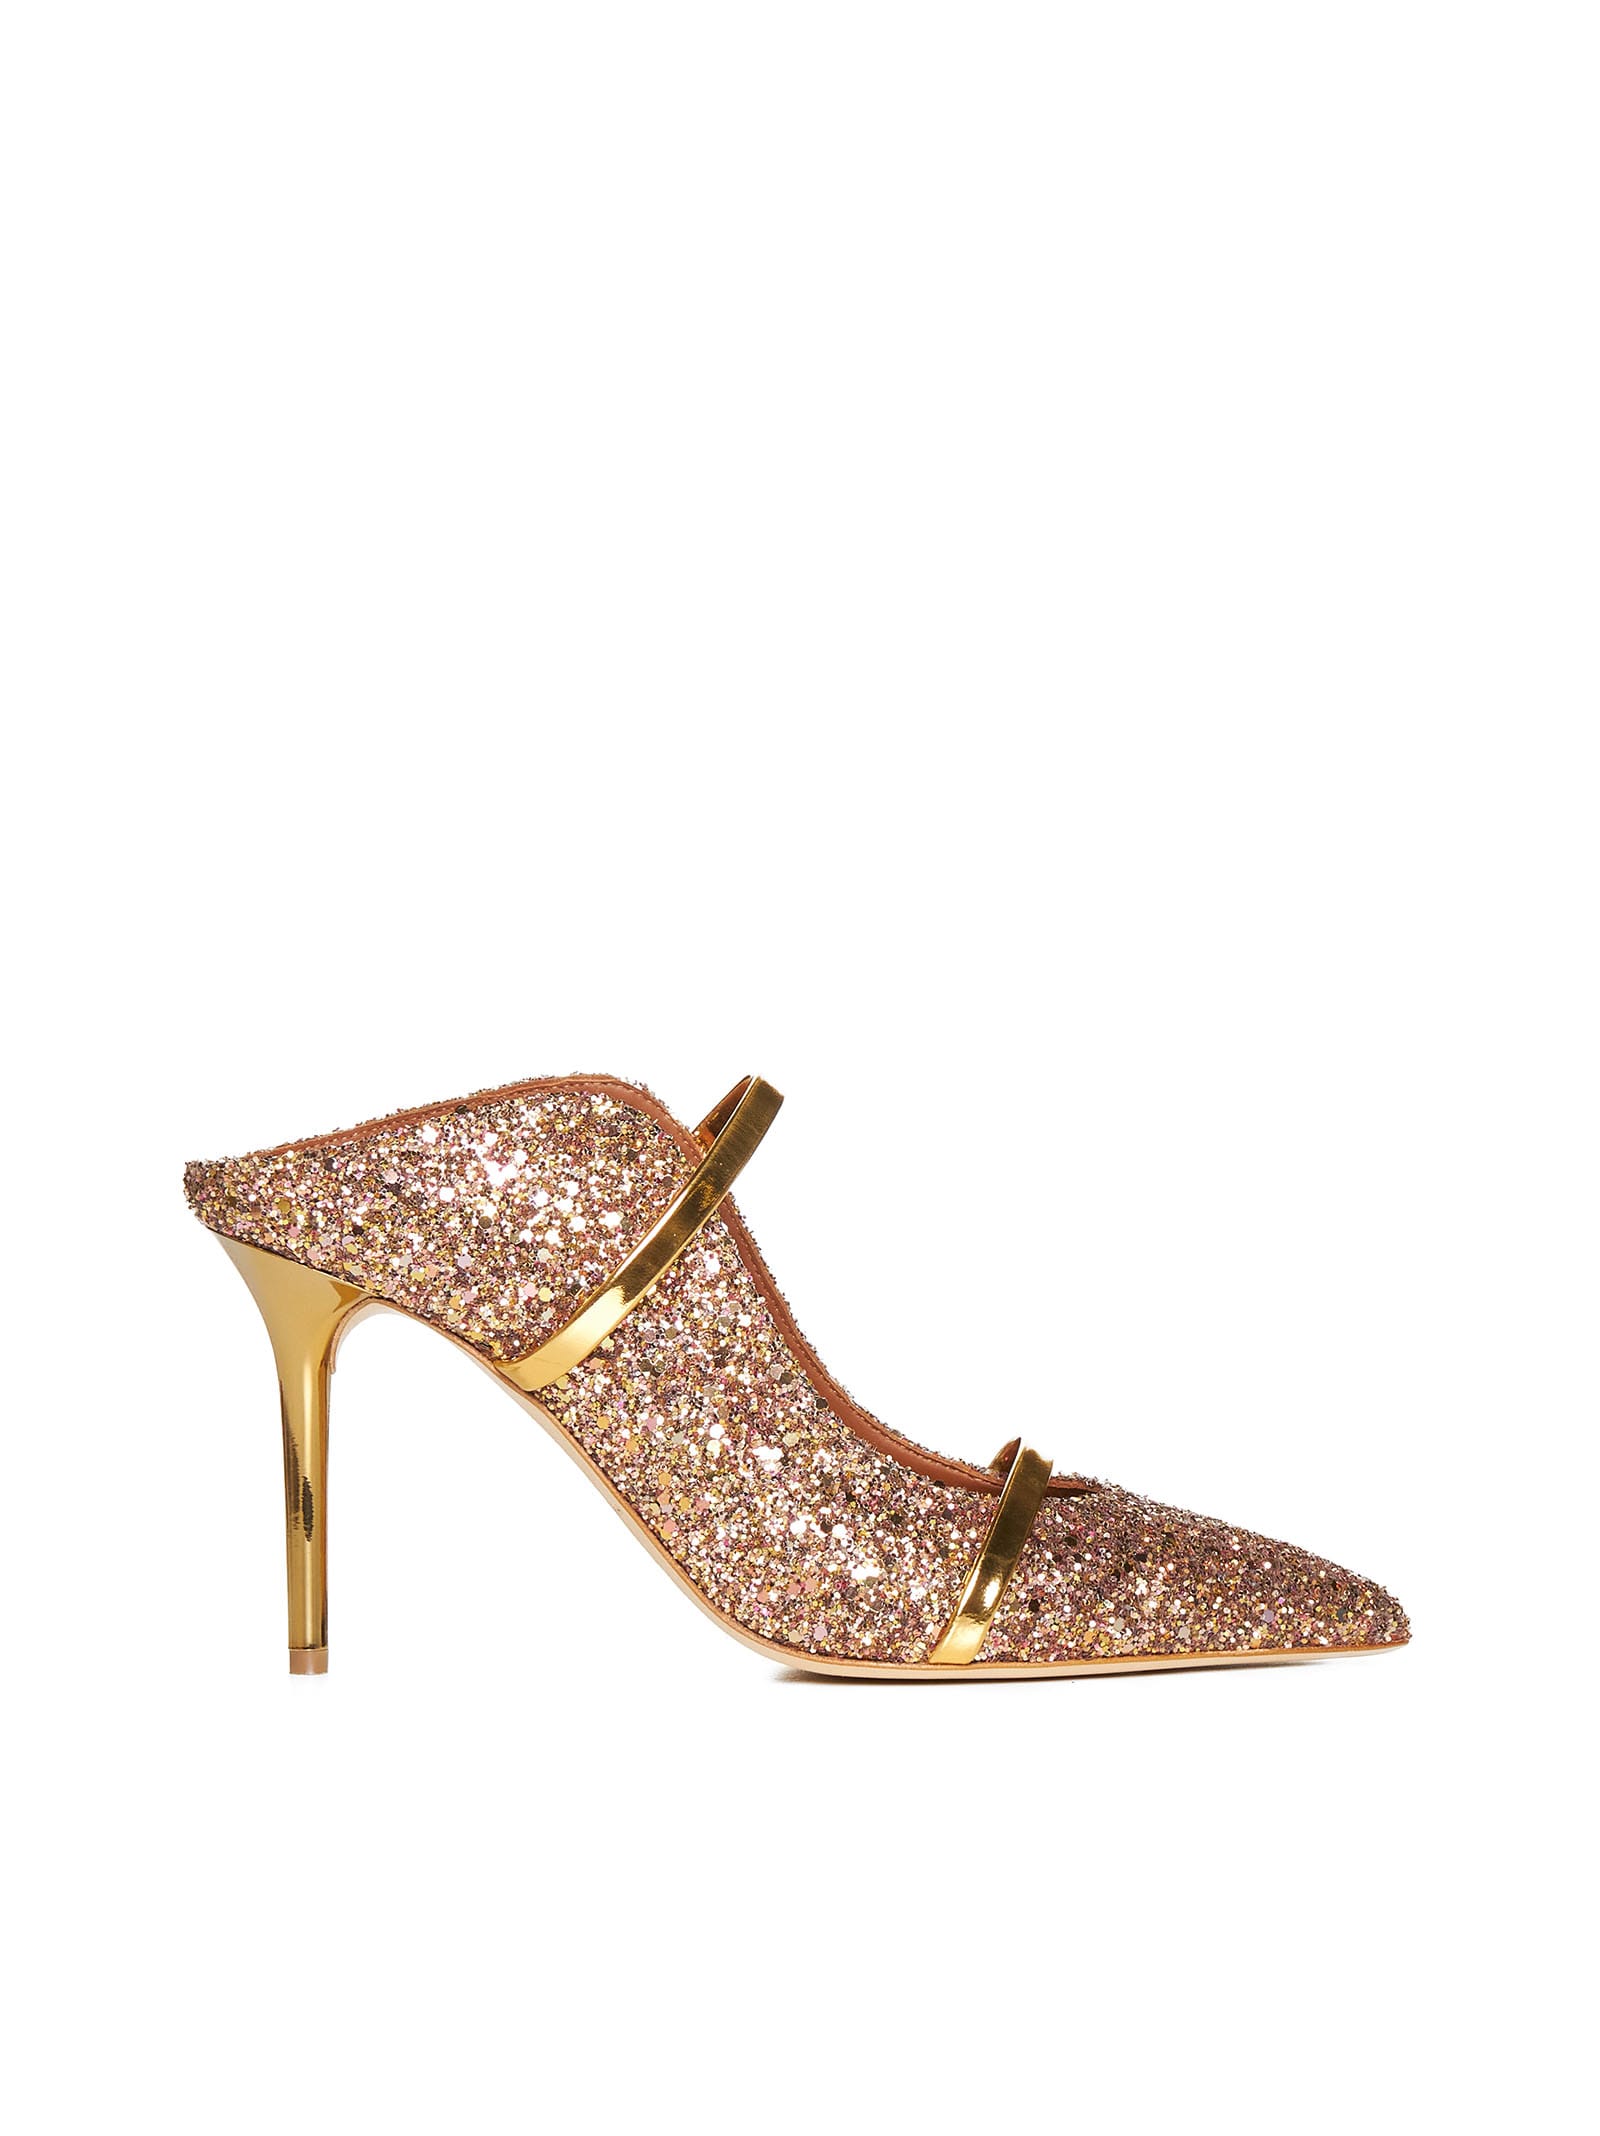 Malone Souliers Flat Shoes In Gold/silver